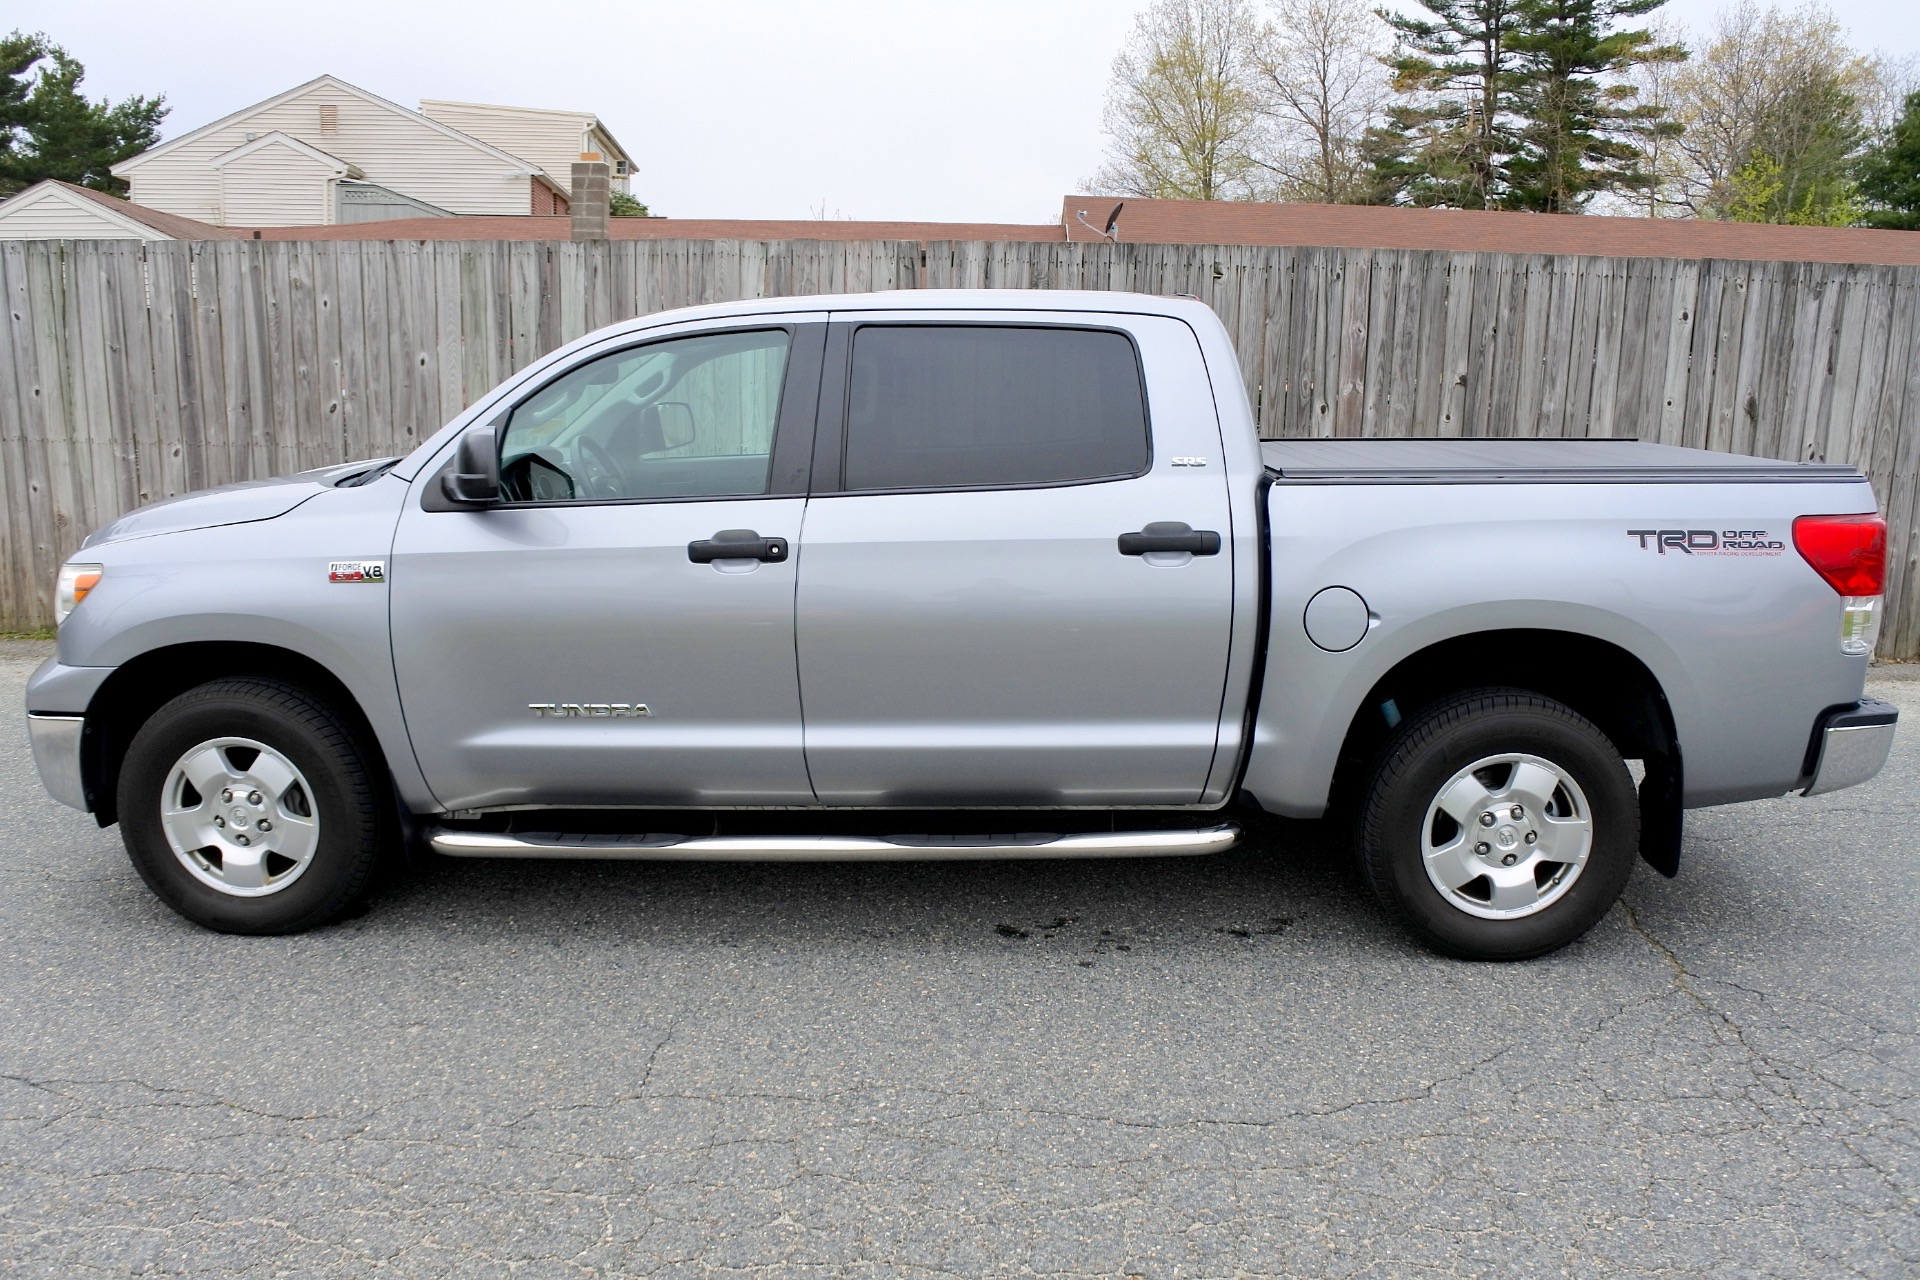 Used 2013 Toyota Tundra 4wd Truck CrewMax 5.7L V8 6-Spd AT (Natl) For